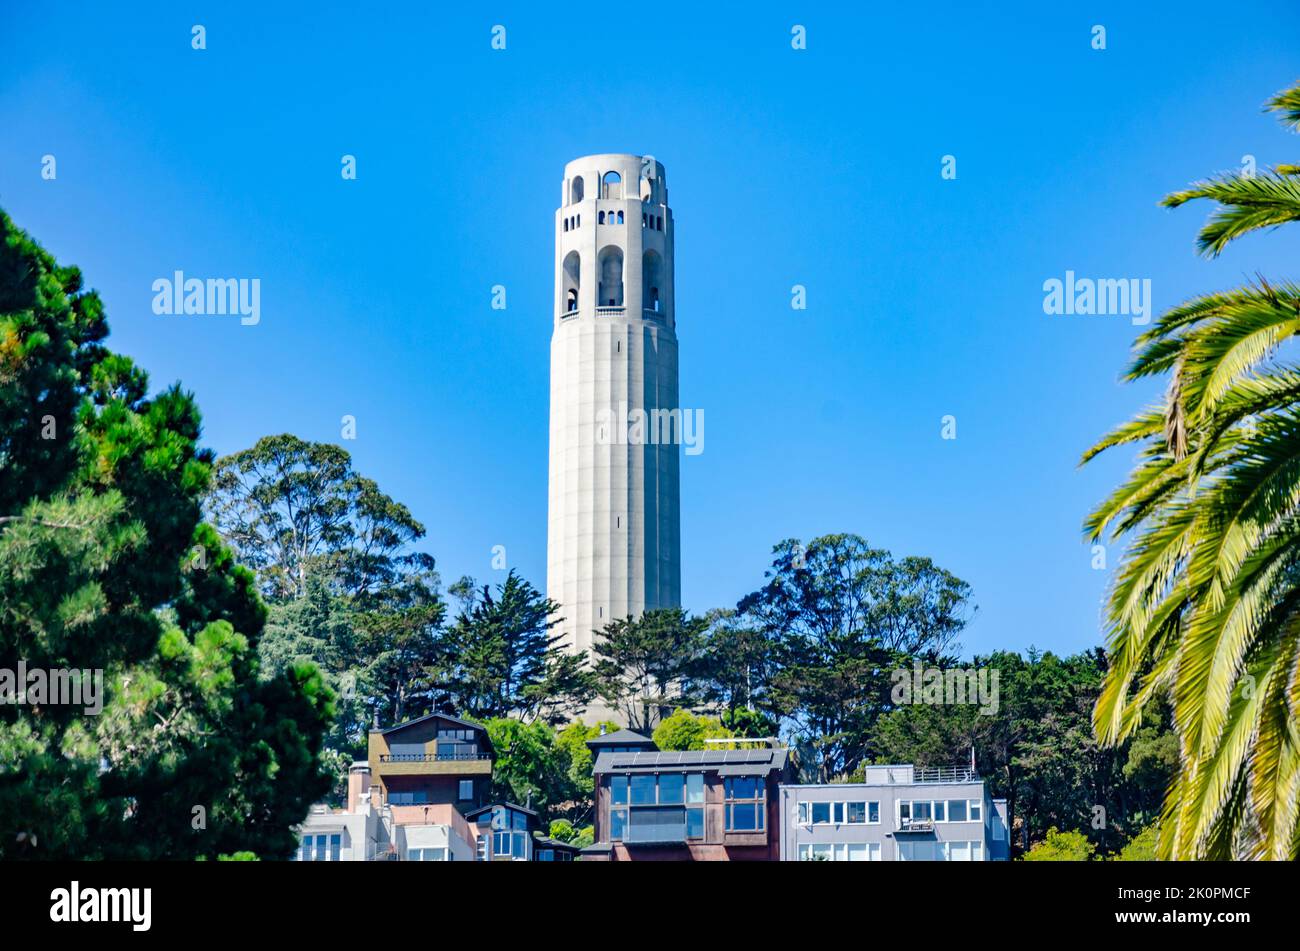 The Coit Tower, a white circular tower in San Francisco, California pictured against a clear blue sky. Stock Photo